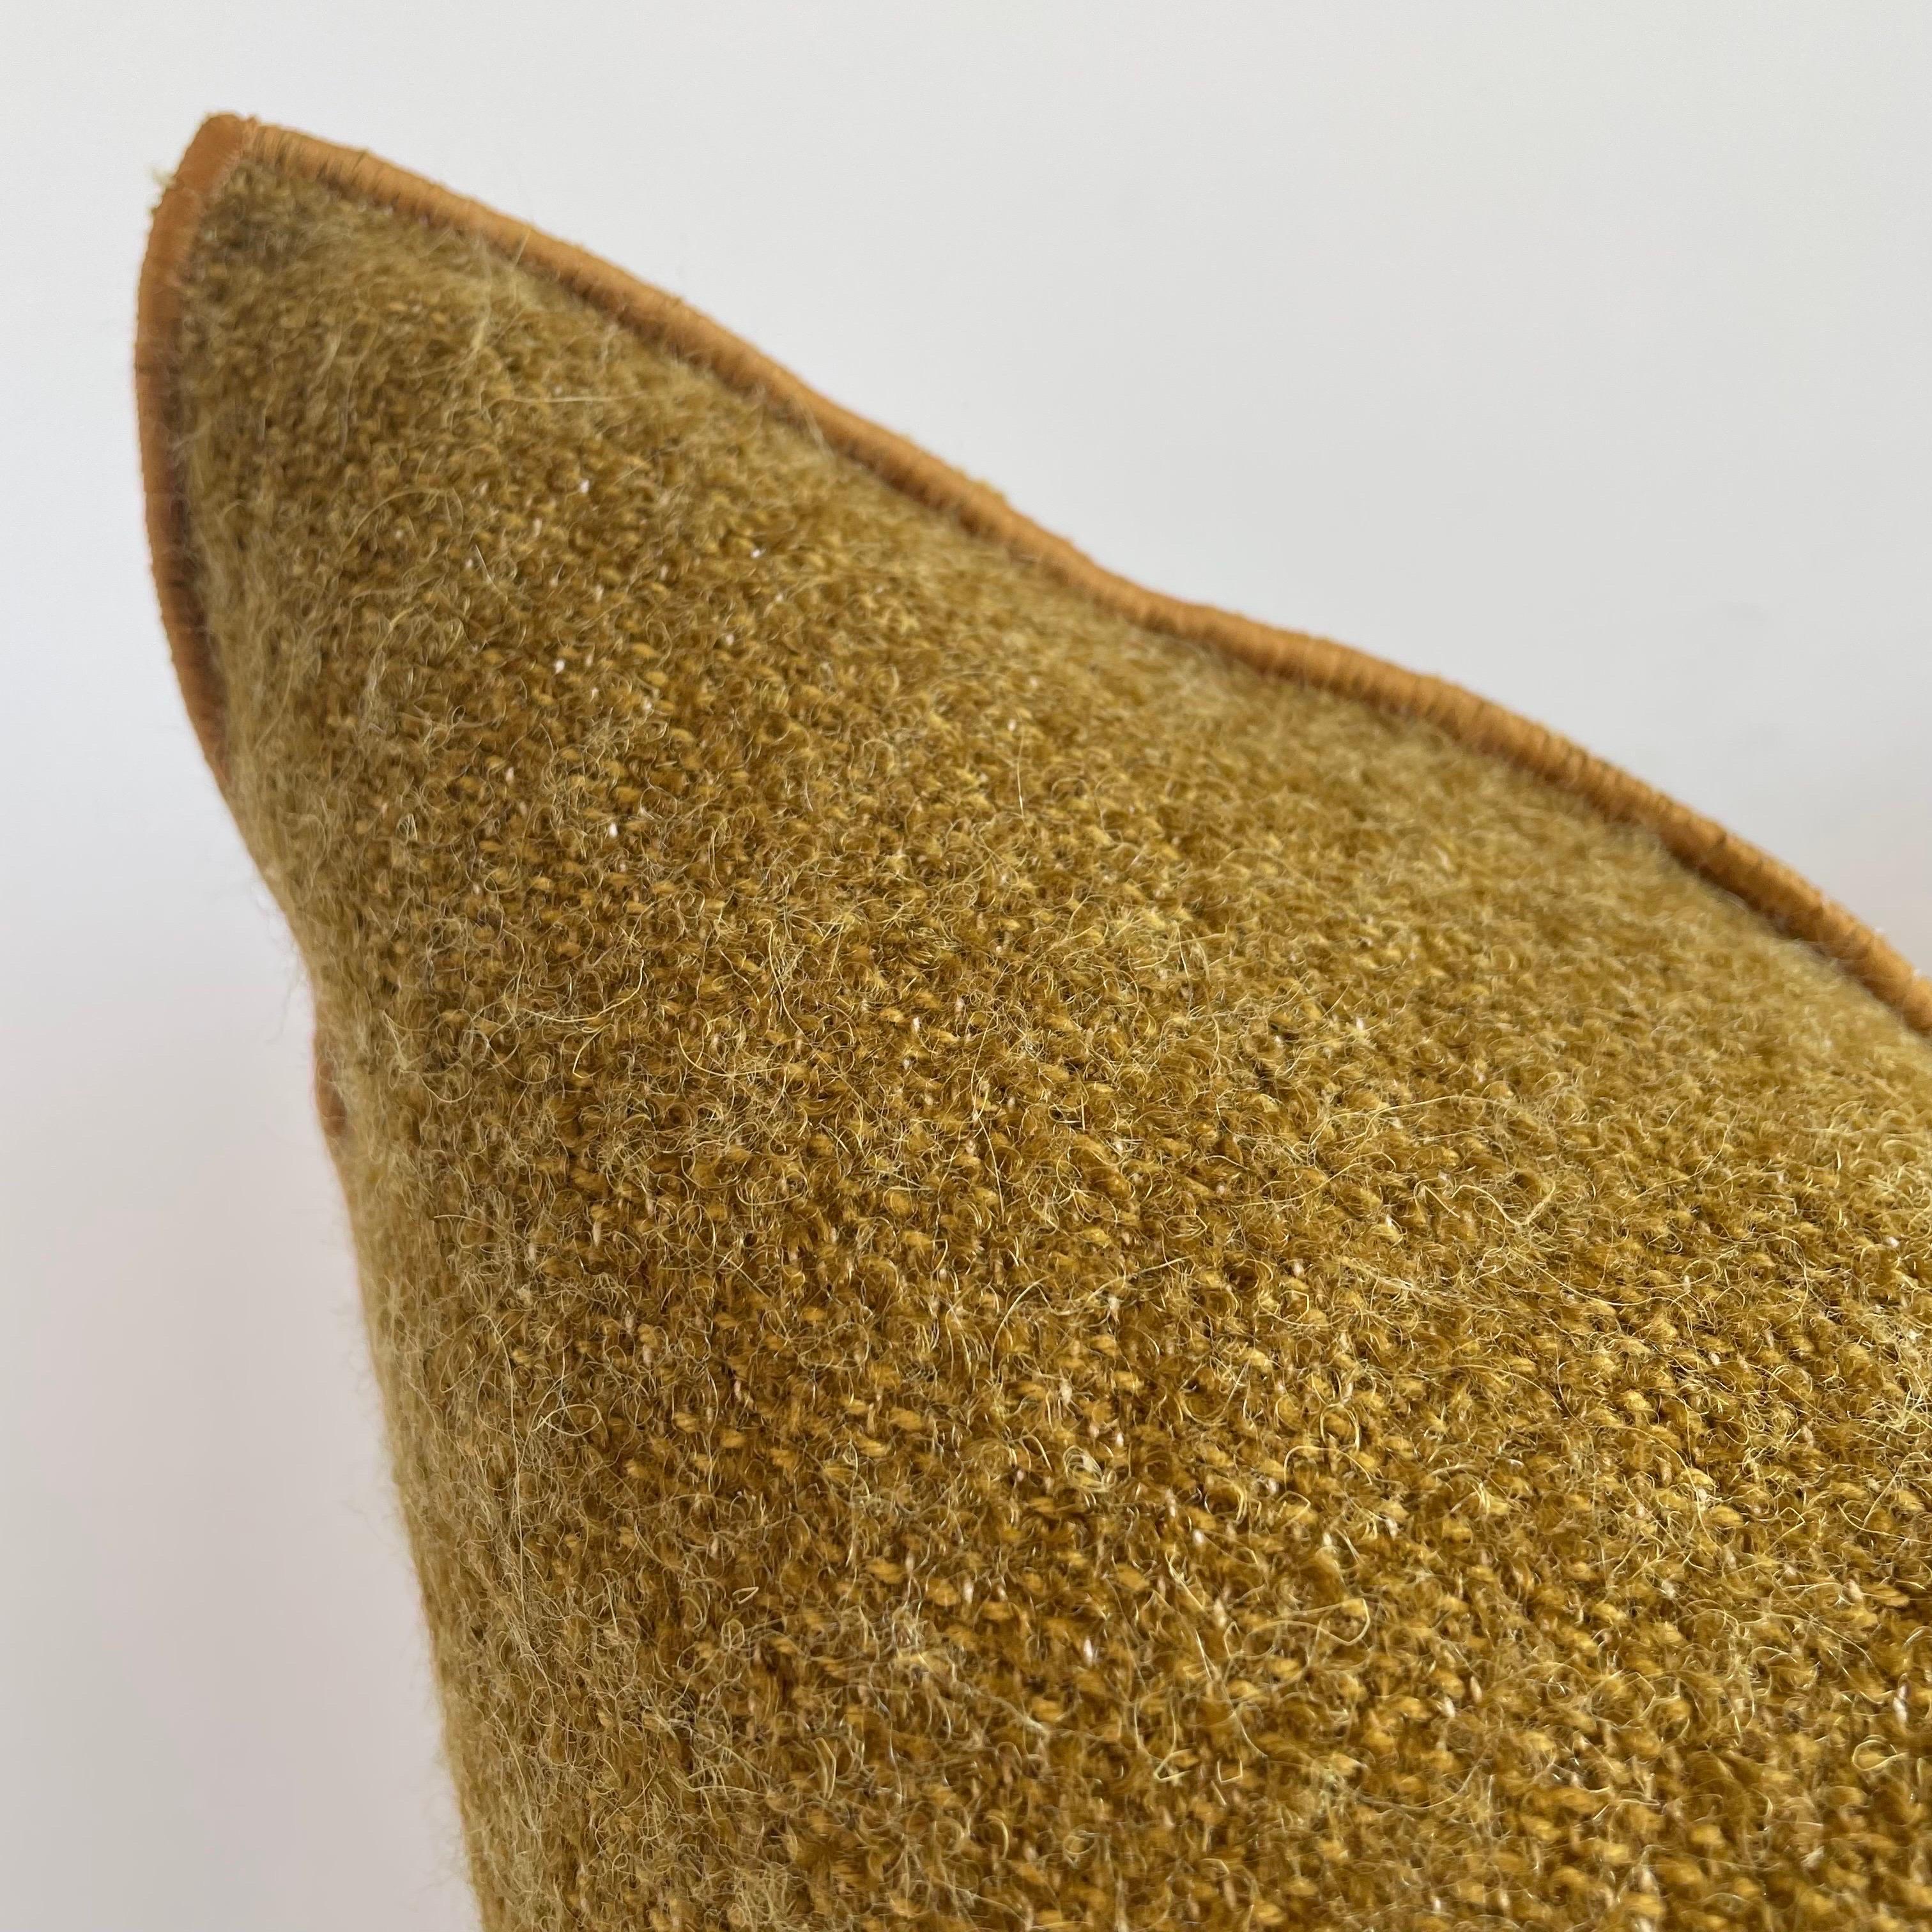 Custom wool blend accent pillow with down insert 
Color: Ocre 
A deep dijon, or similar to an aged brass, colored nubby boucle style pillow with a stitched edge, metal zipper closure. Our pillows are constructed with vintage one of a kind textiles